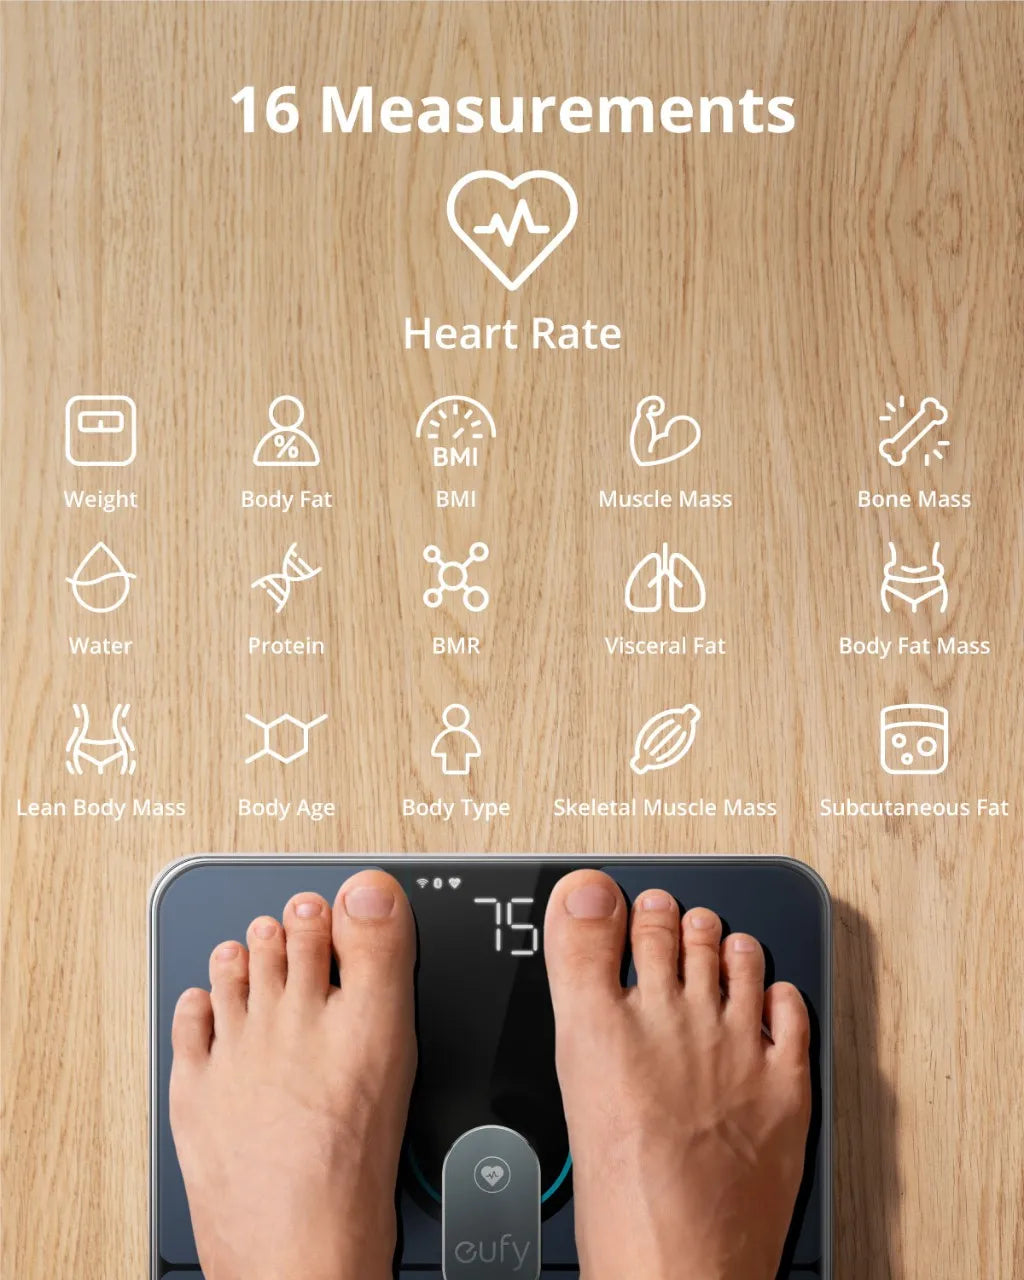 eufy Smart Scale P2 Pro Digital Bathroom Scale Wi-Fi Bluetooth 16 Measurements Including Weight Heart Rate Body Fat